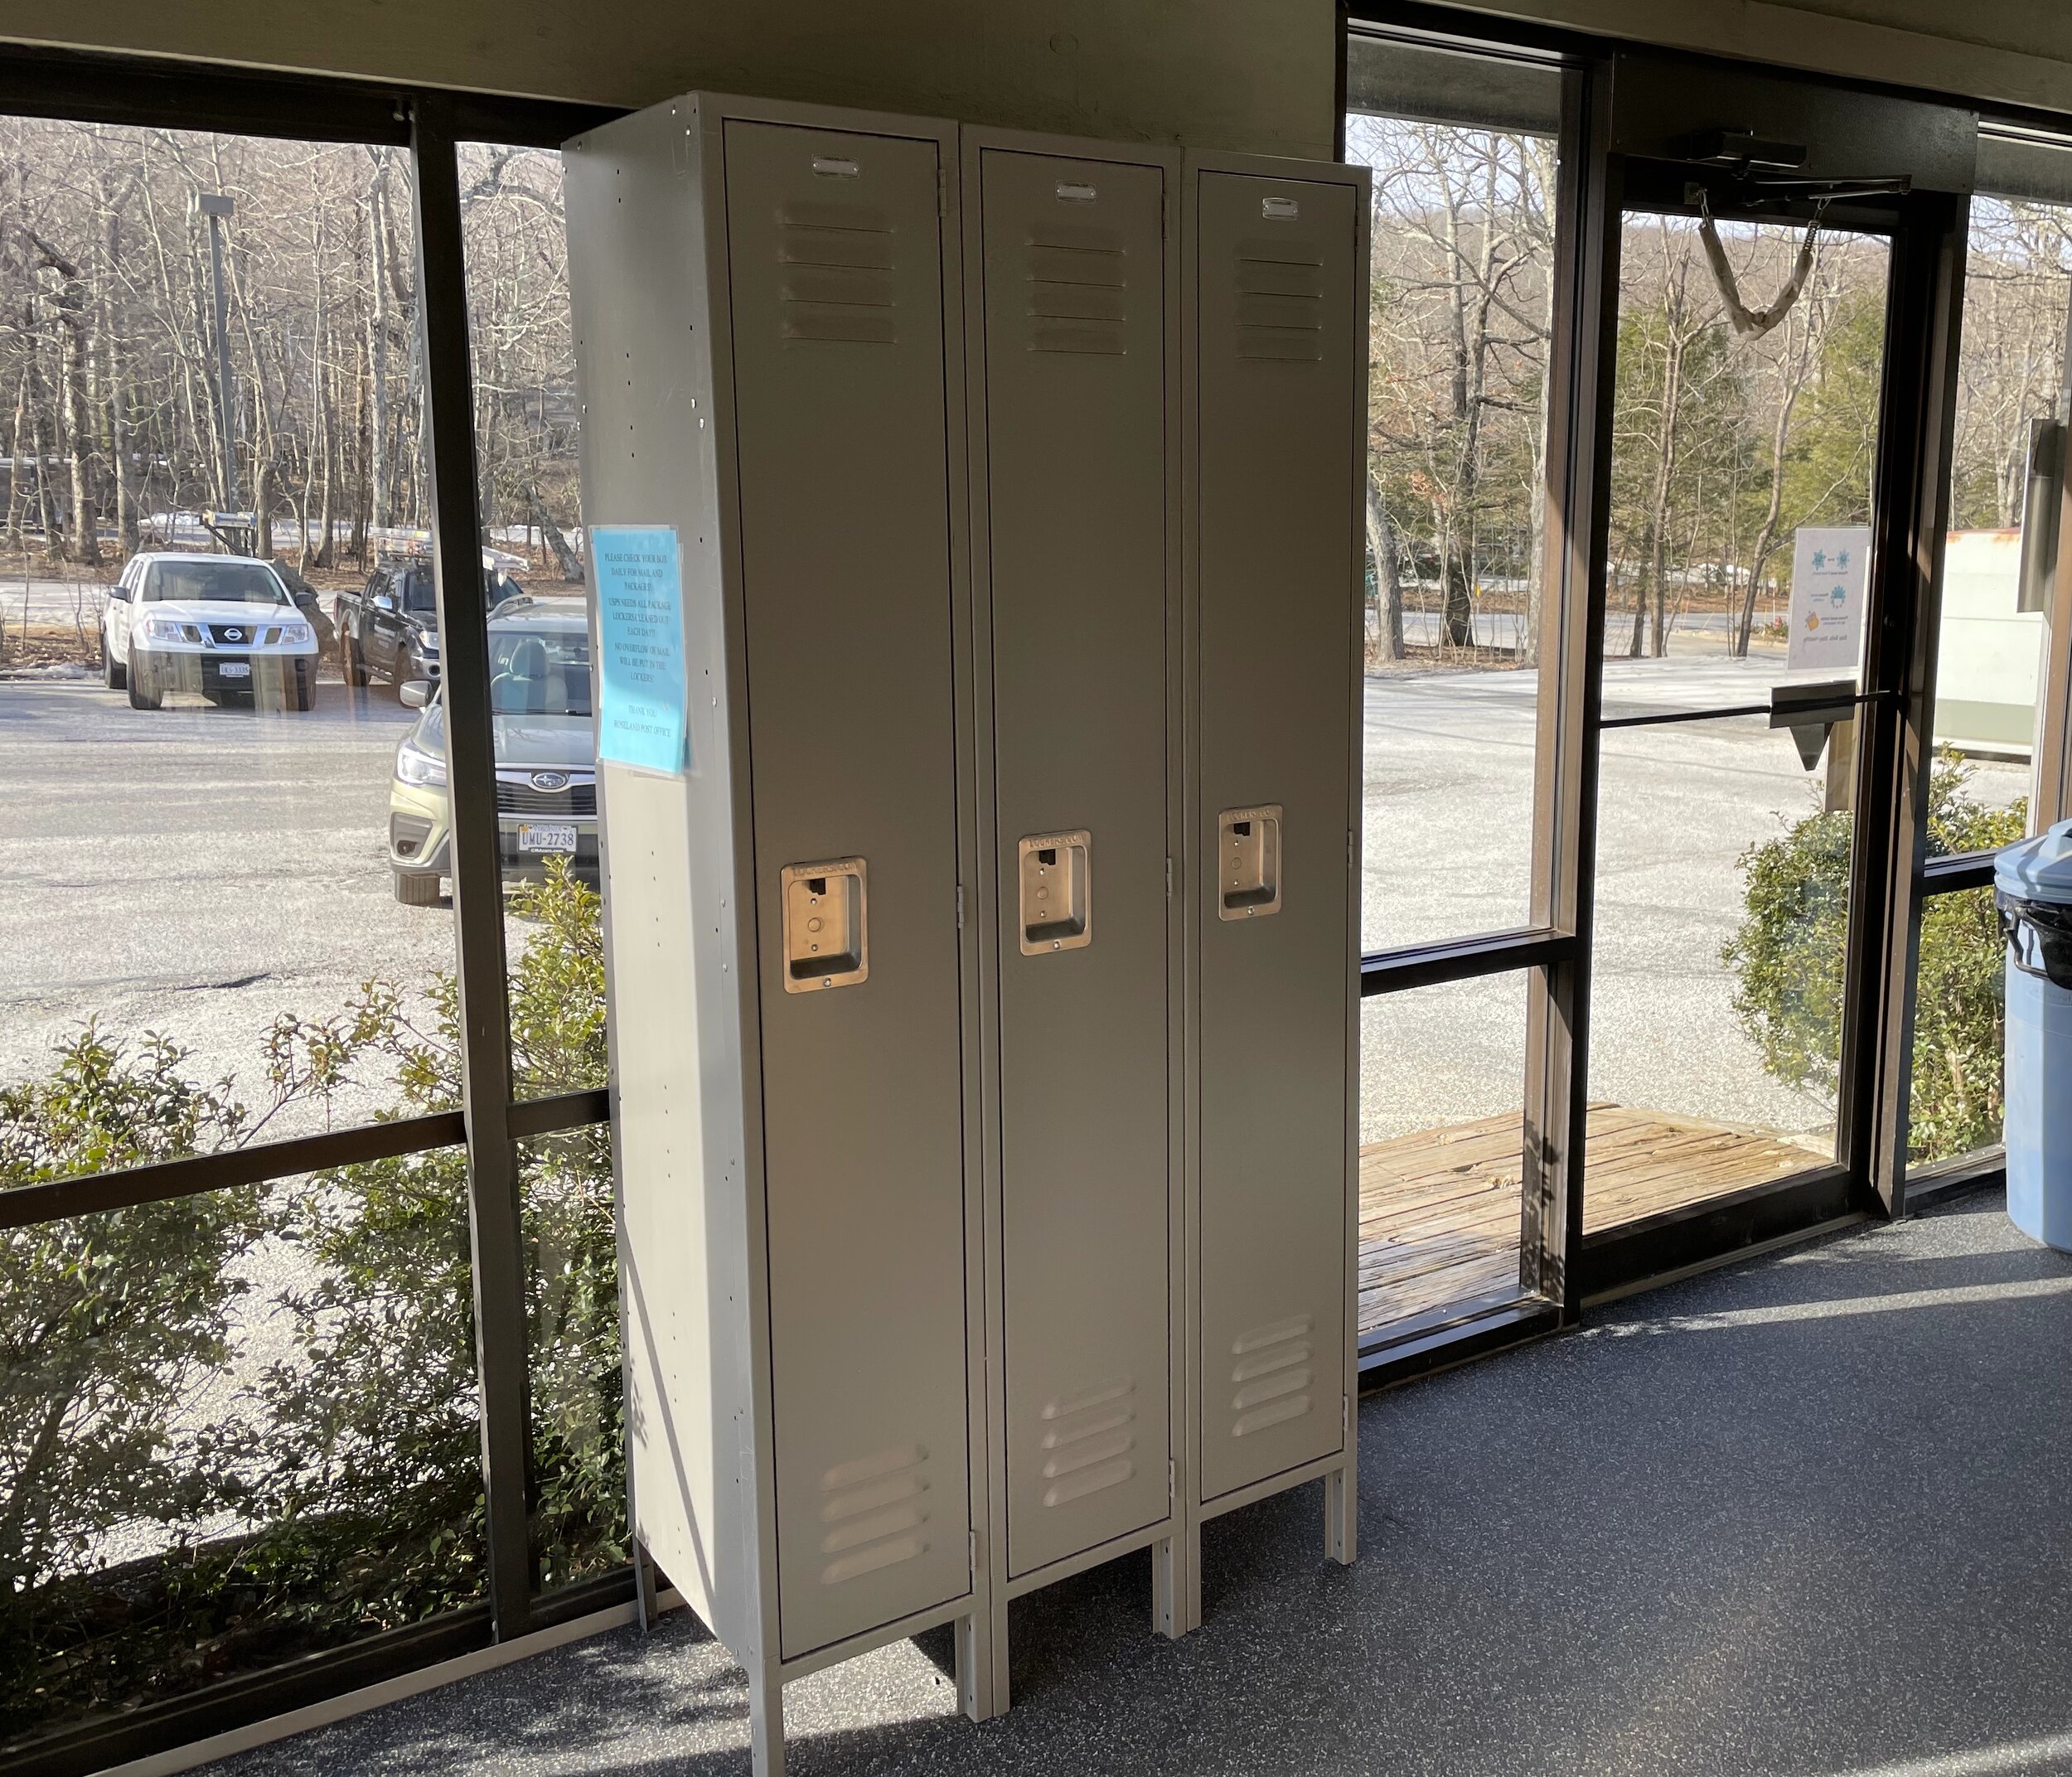 Huge "golf bag sized" package lockers are new